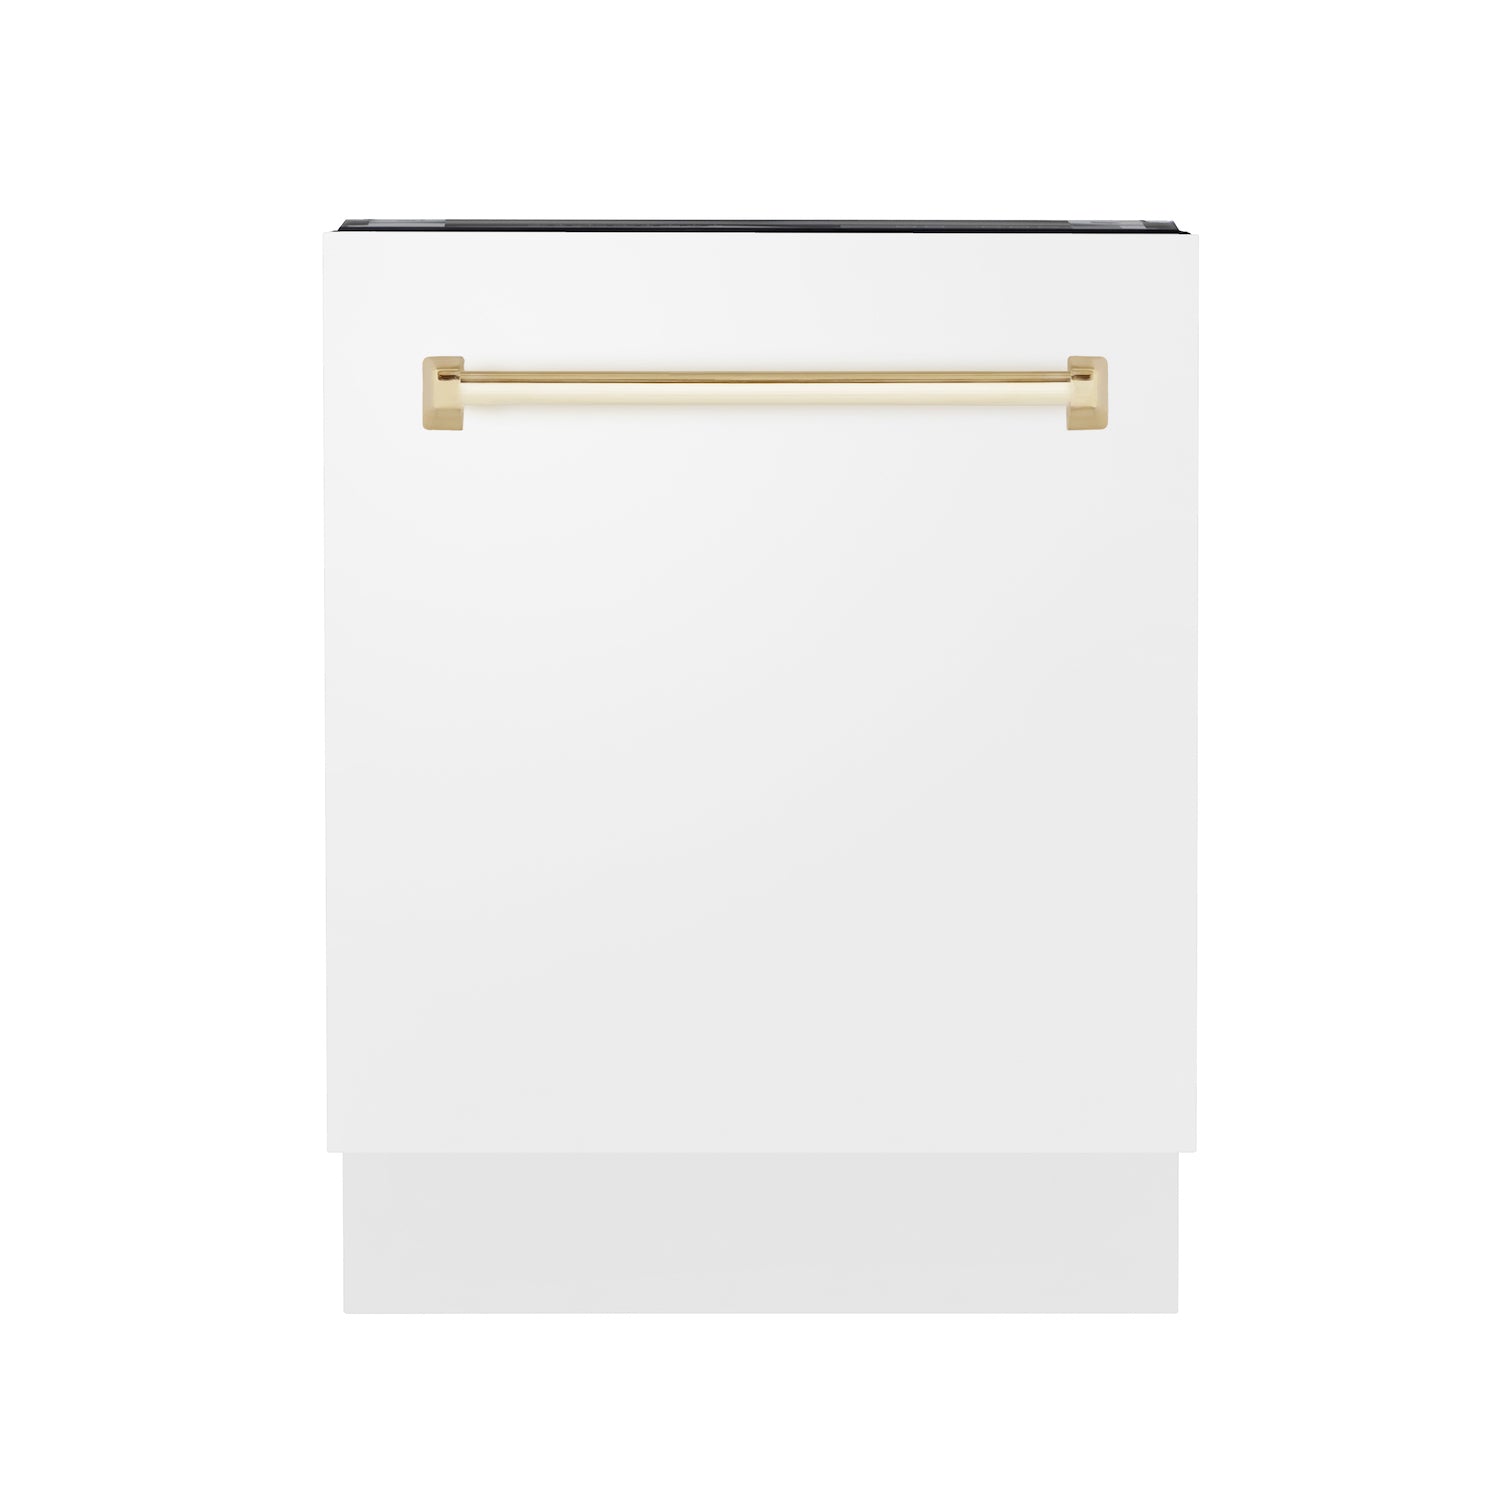 ZLINE Autograph Edition 24" Tall Tub Dishwasher in White Matte with Polished Gold Accent Handle (DWVZ-WM-24-G) front, door closed.